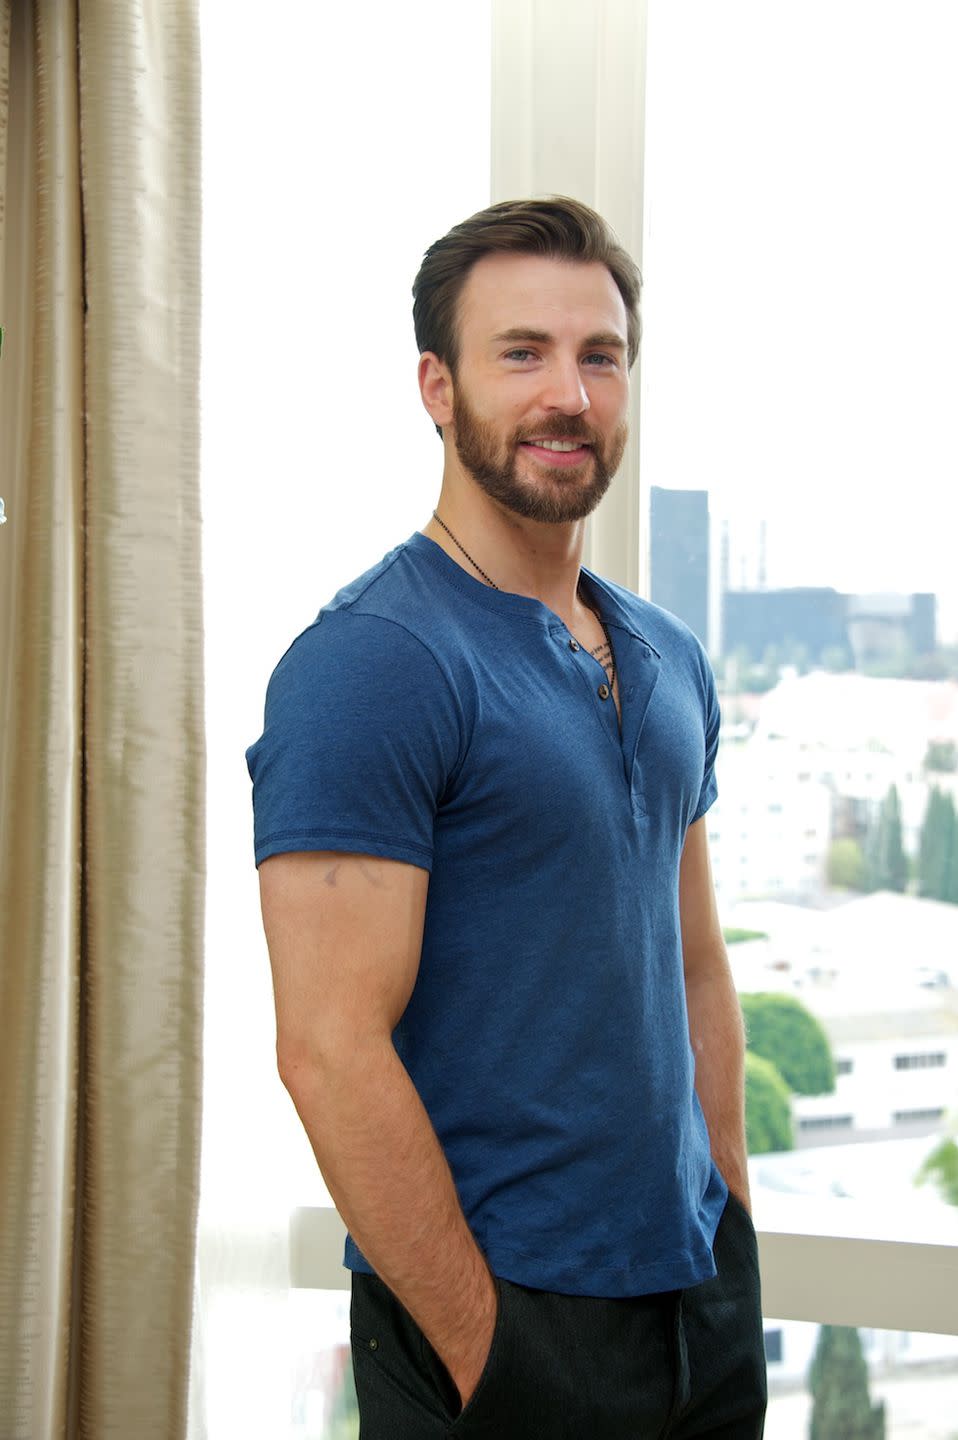 ...and here's Chris Evans in 2014.